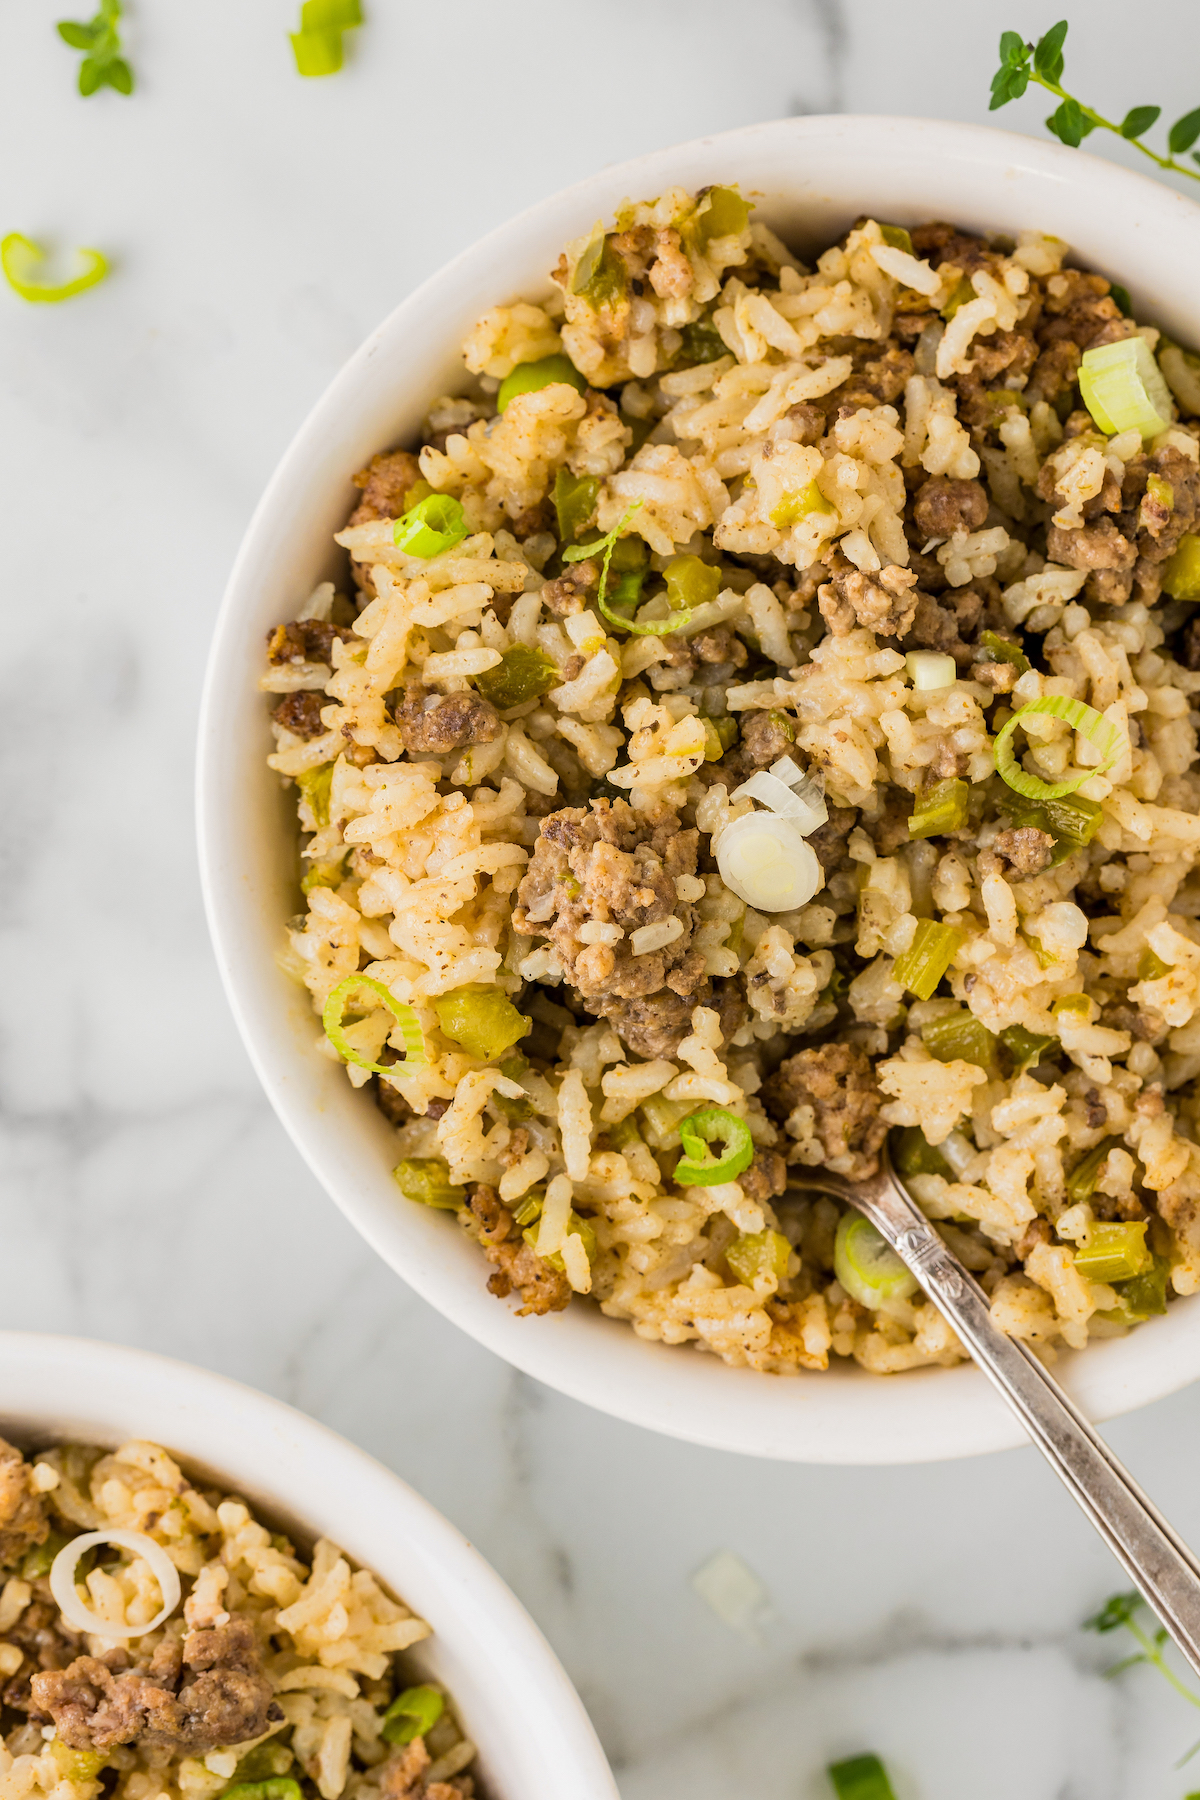 Bowl of hearty and meaty Cajun dirty rice topped with sliced green onions.